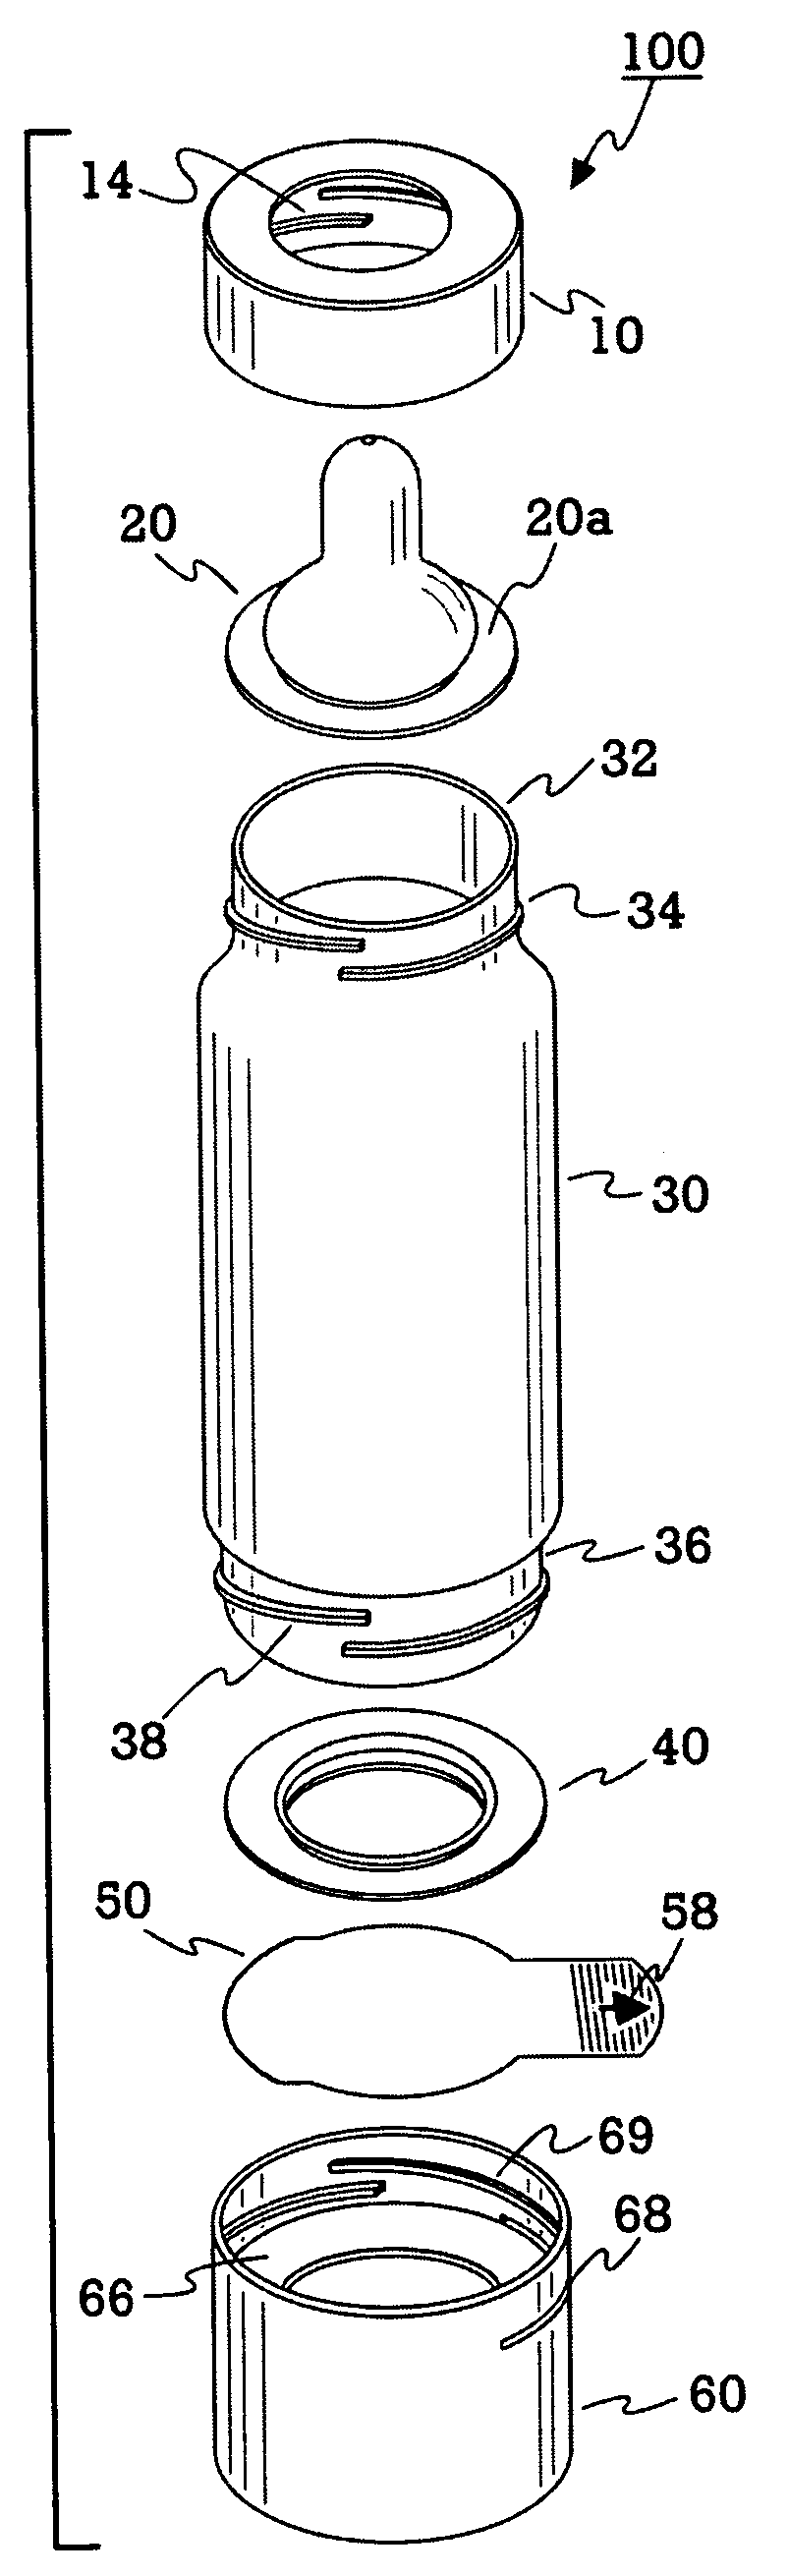 Multi-chambered container for storing and mixing a first and second substance into a composition